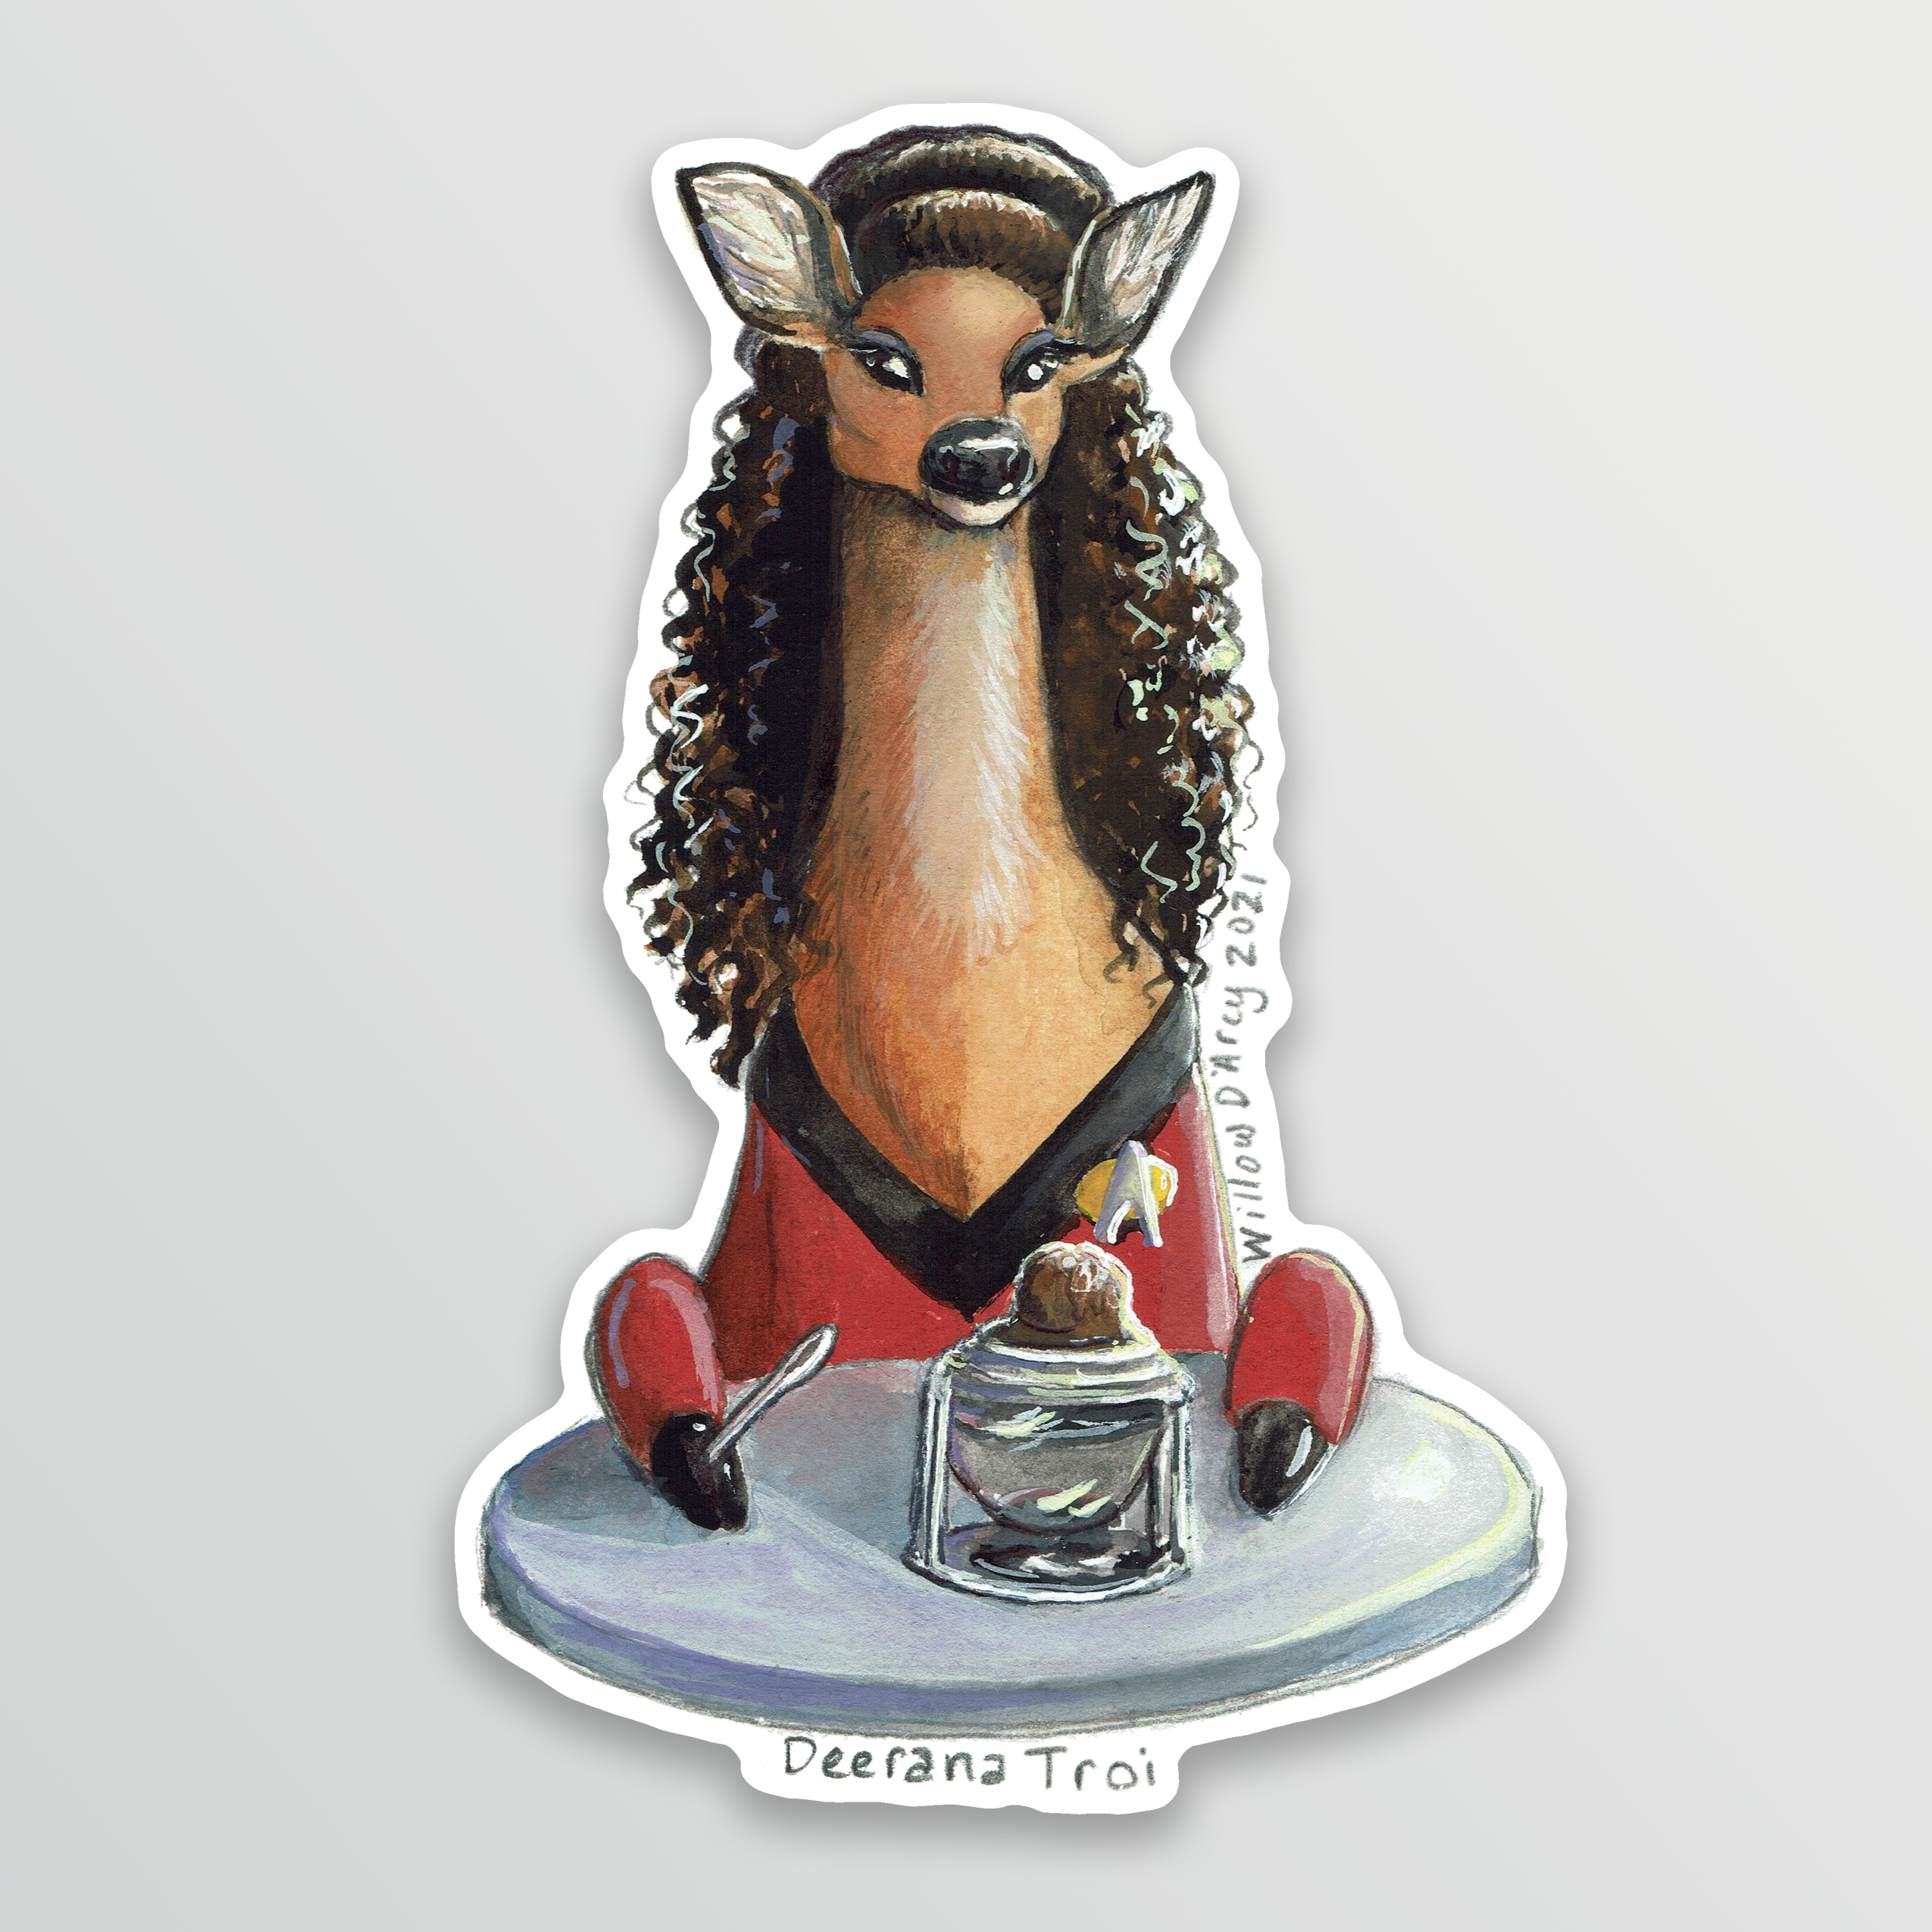 Sticker of an illustration of a deer wearing a science fiction character costume, sitting in front of a dessert.